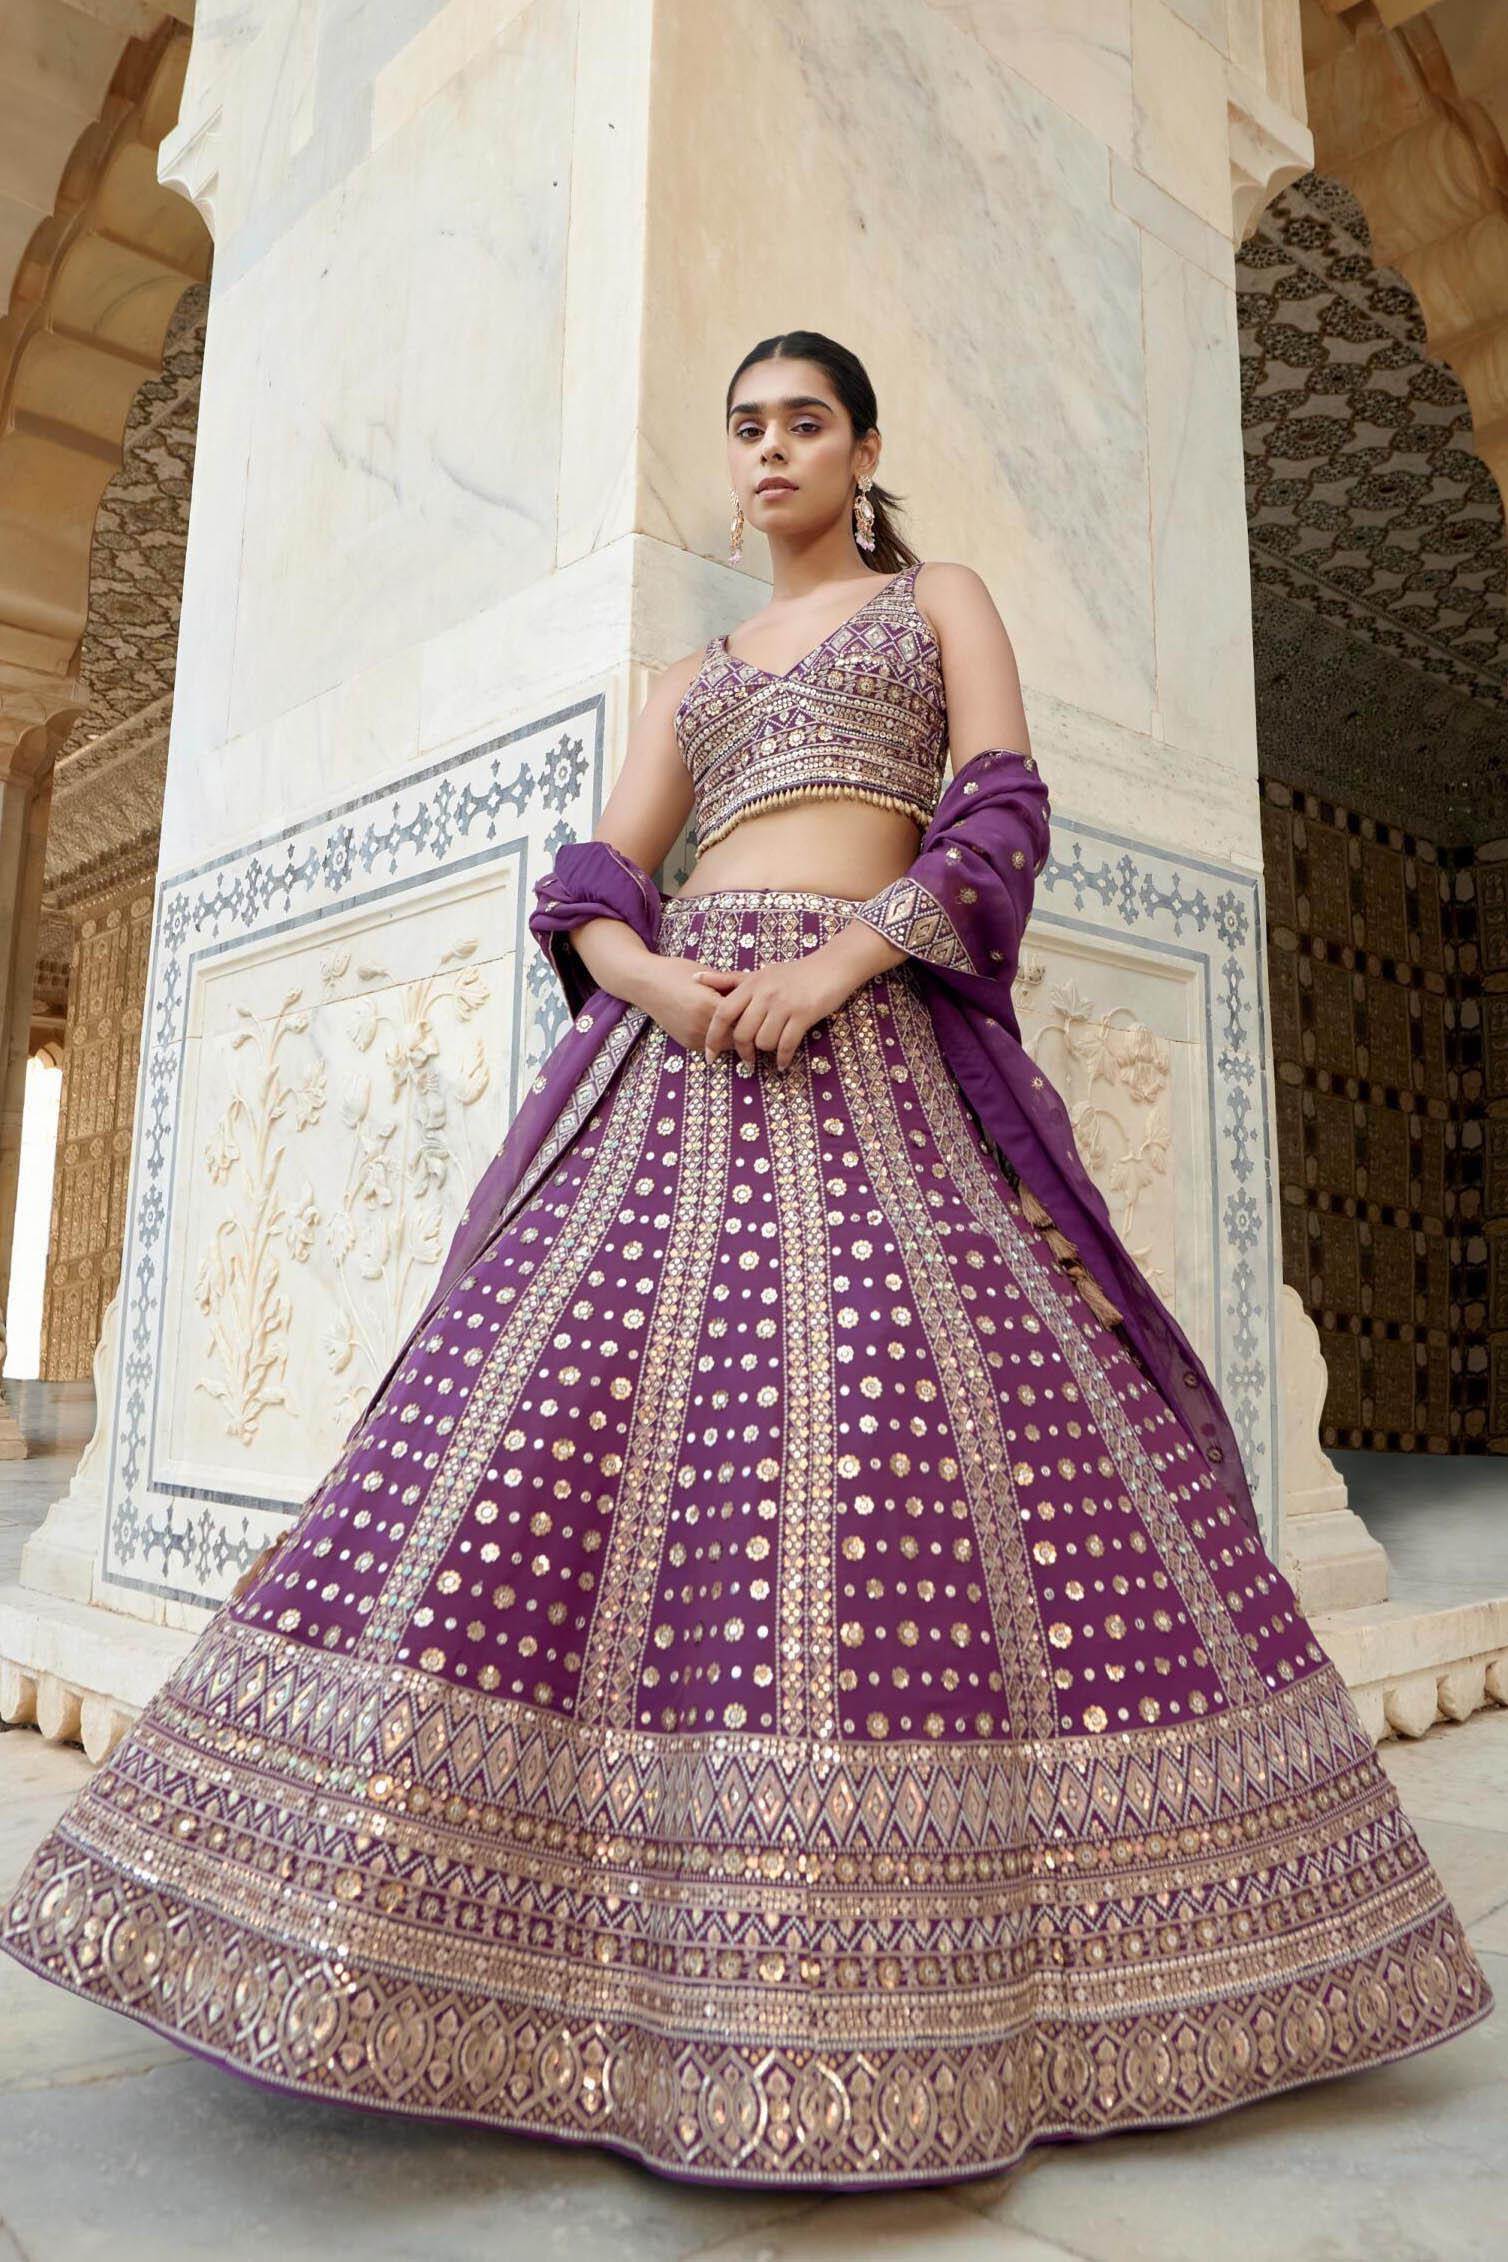 Brides That Picked Wine Coloured Lehengas For Their Wedding Soirees! |  WedMeGood